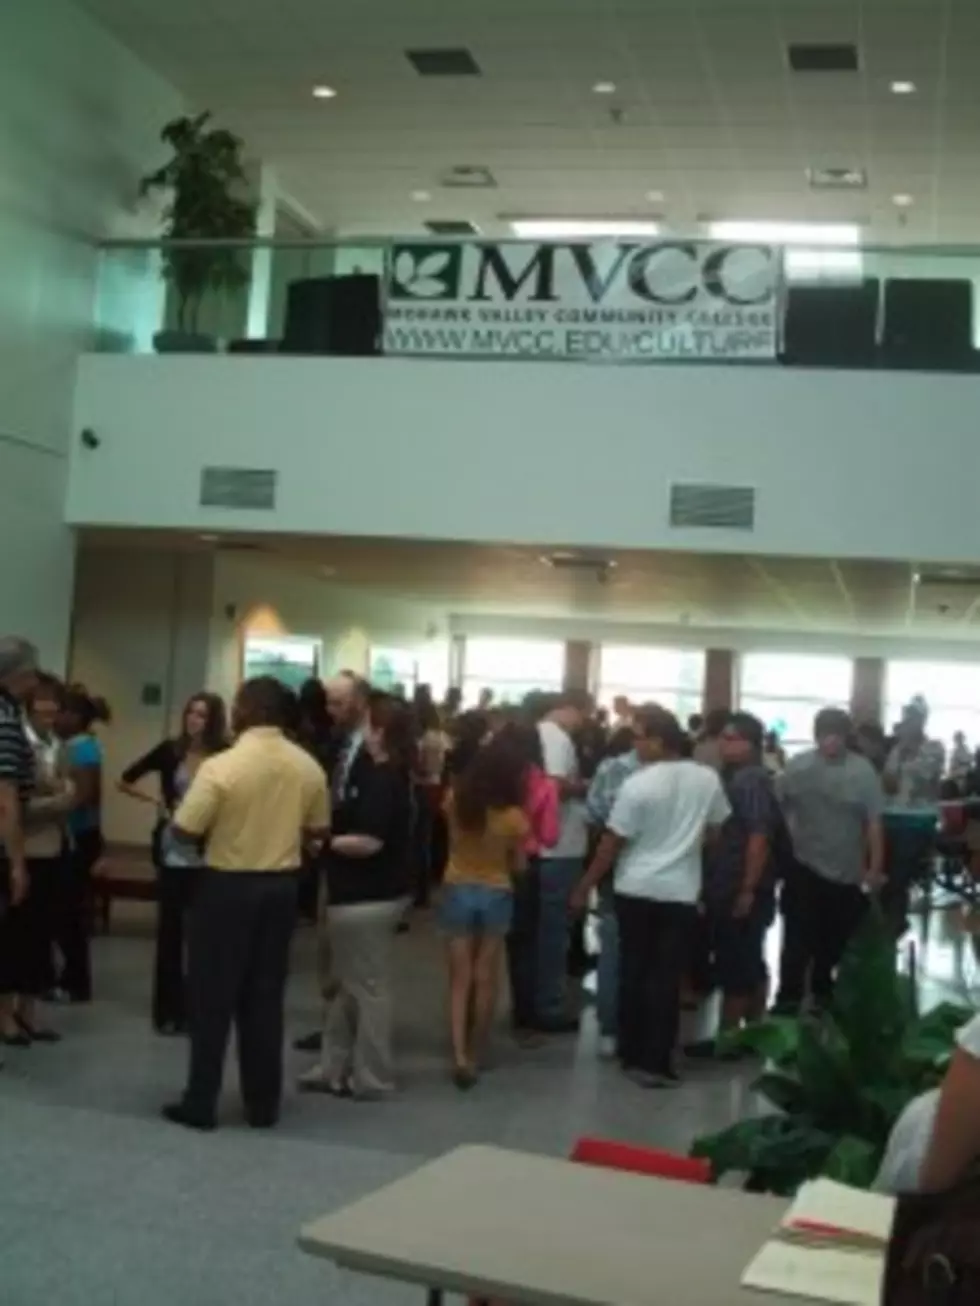 Annual Work Readiness Day Kicks Off At MVCC